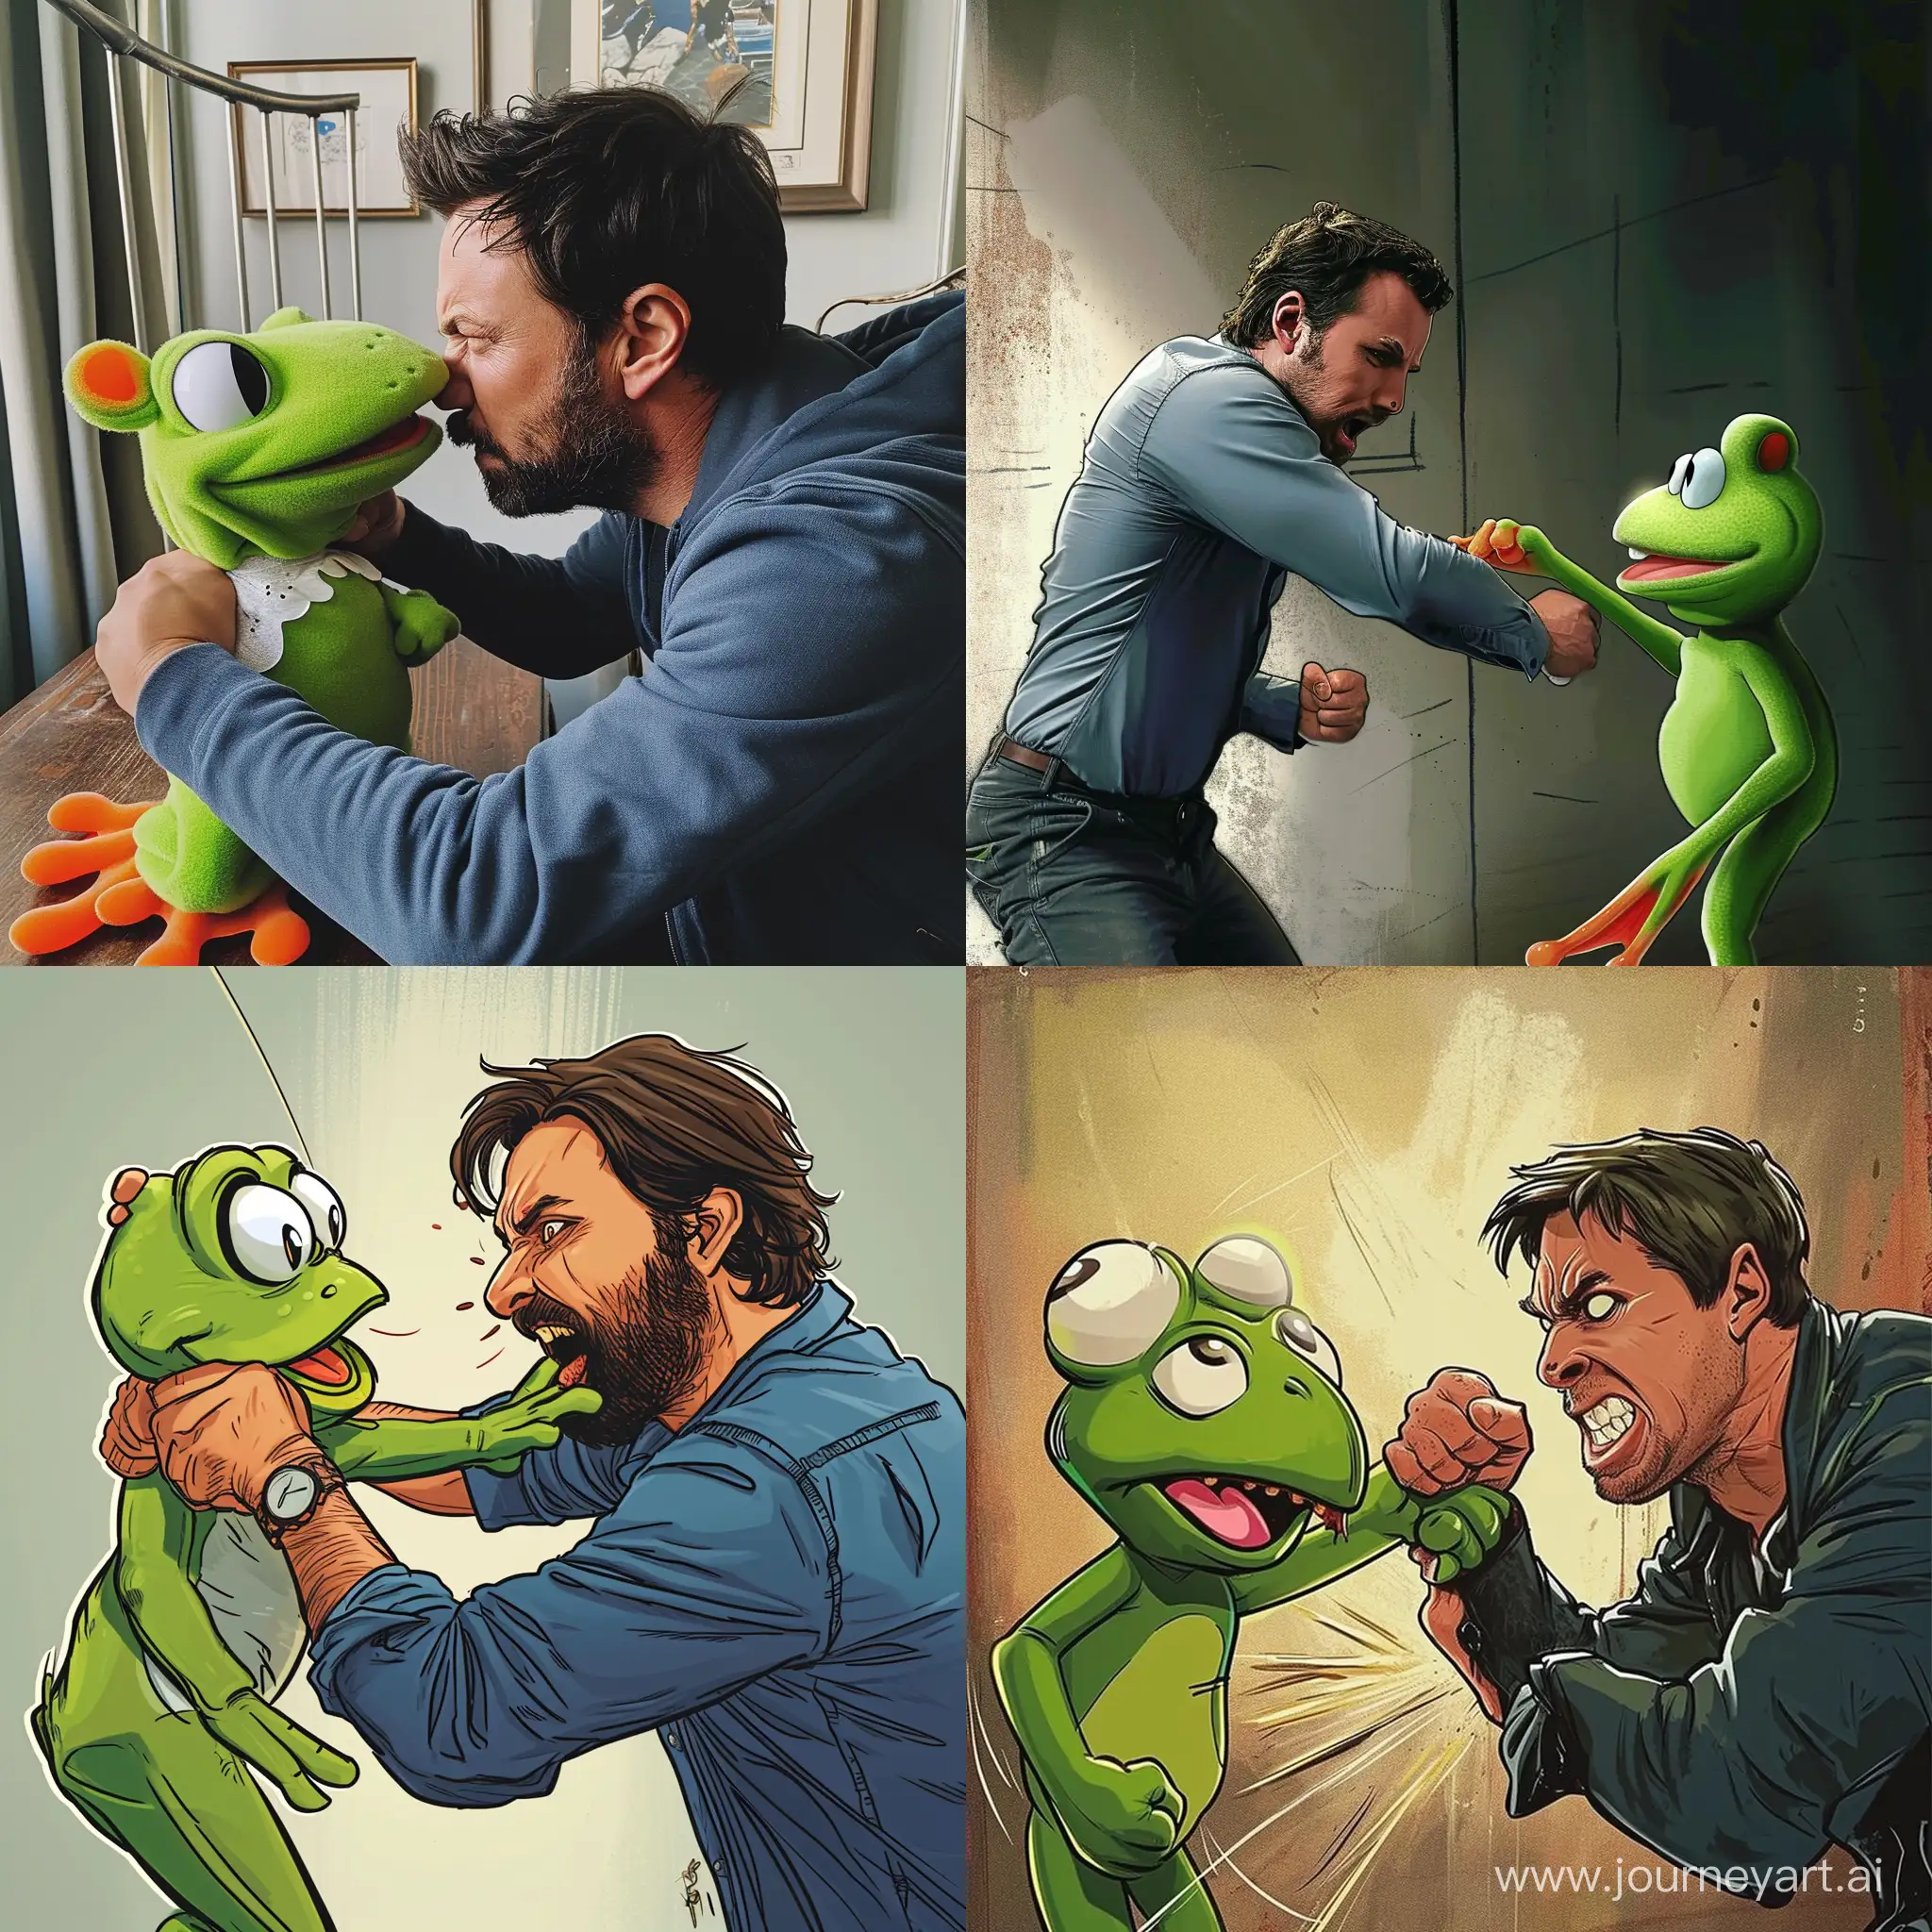 ben affleck punching pepe the frog in the face, nickelodeon cartoon